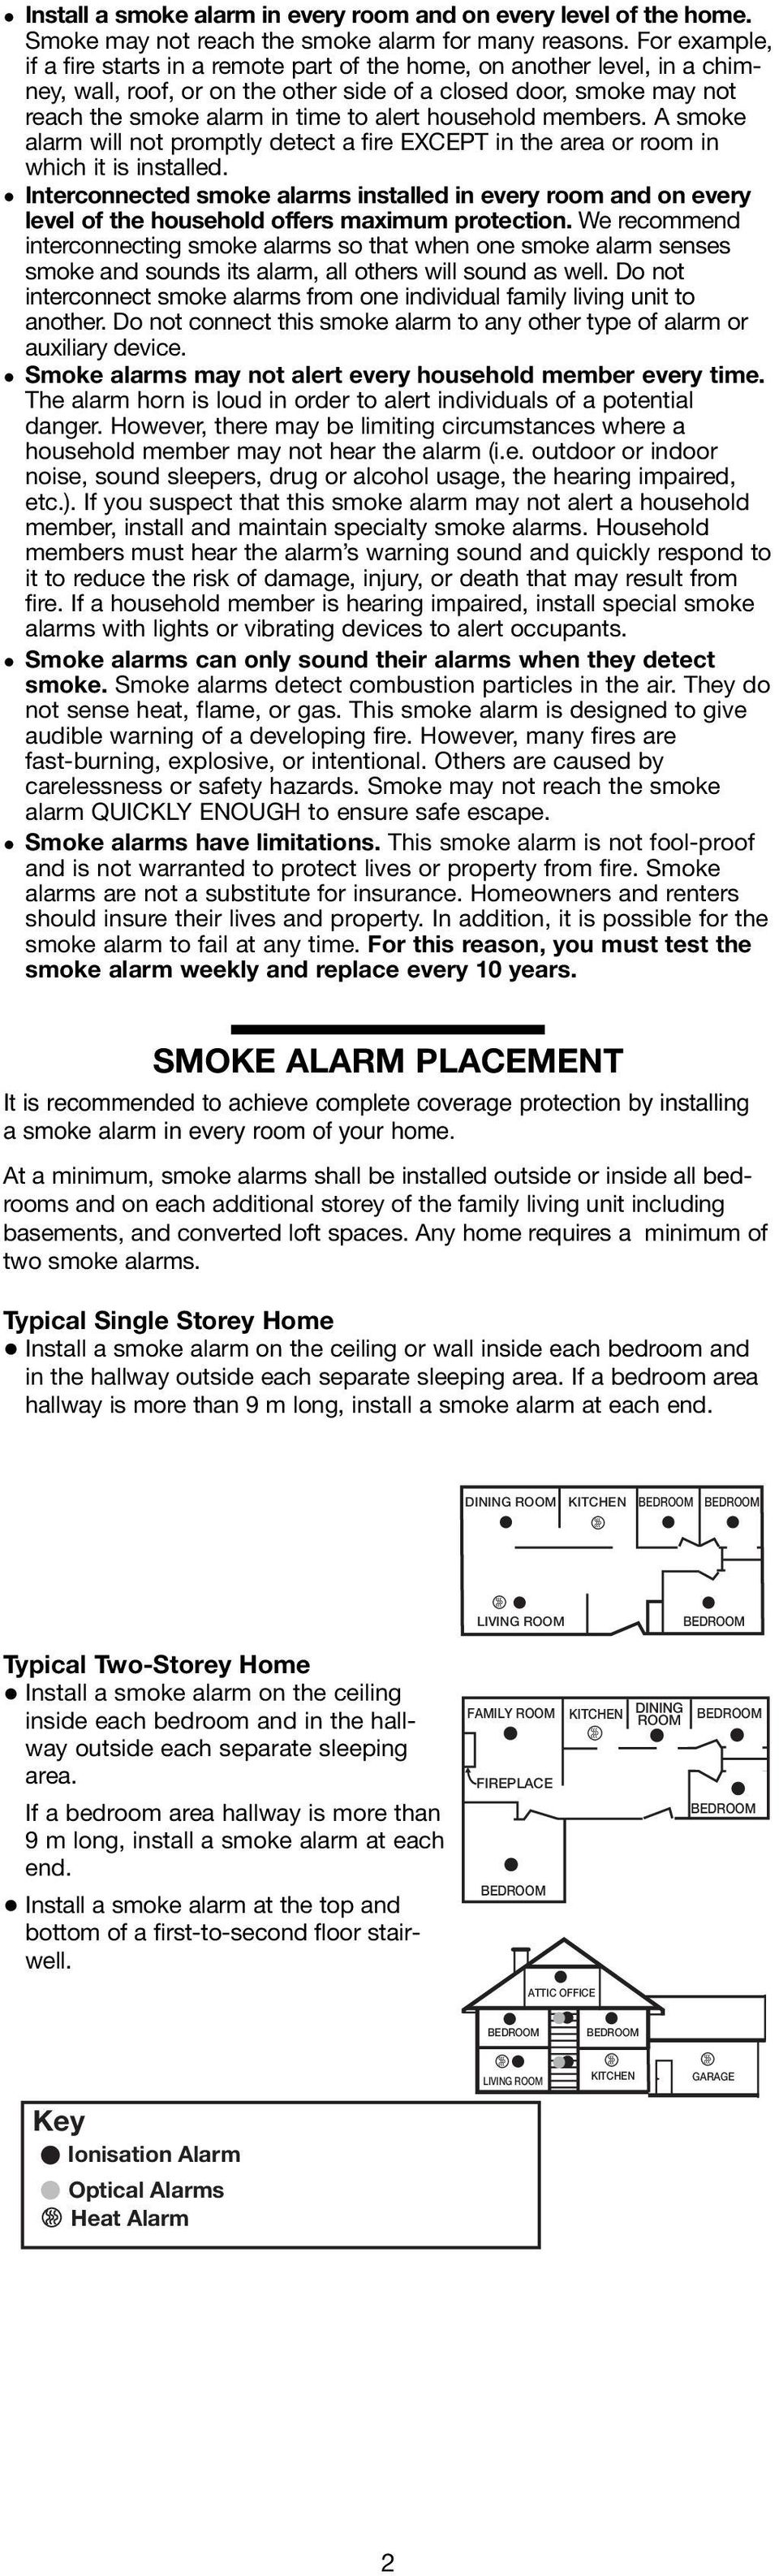 household members. A smoke alarm will not promptly detect a fire EXCEPT in the area or room in which it is installed.